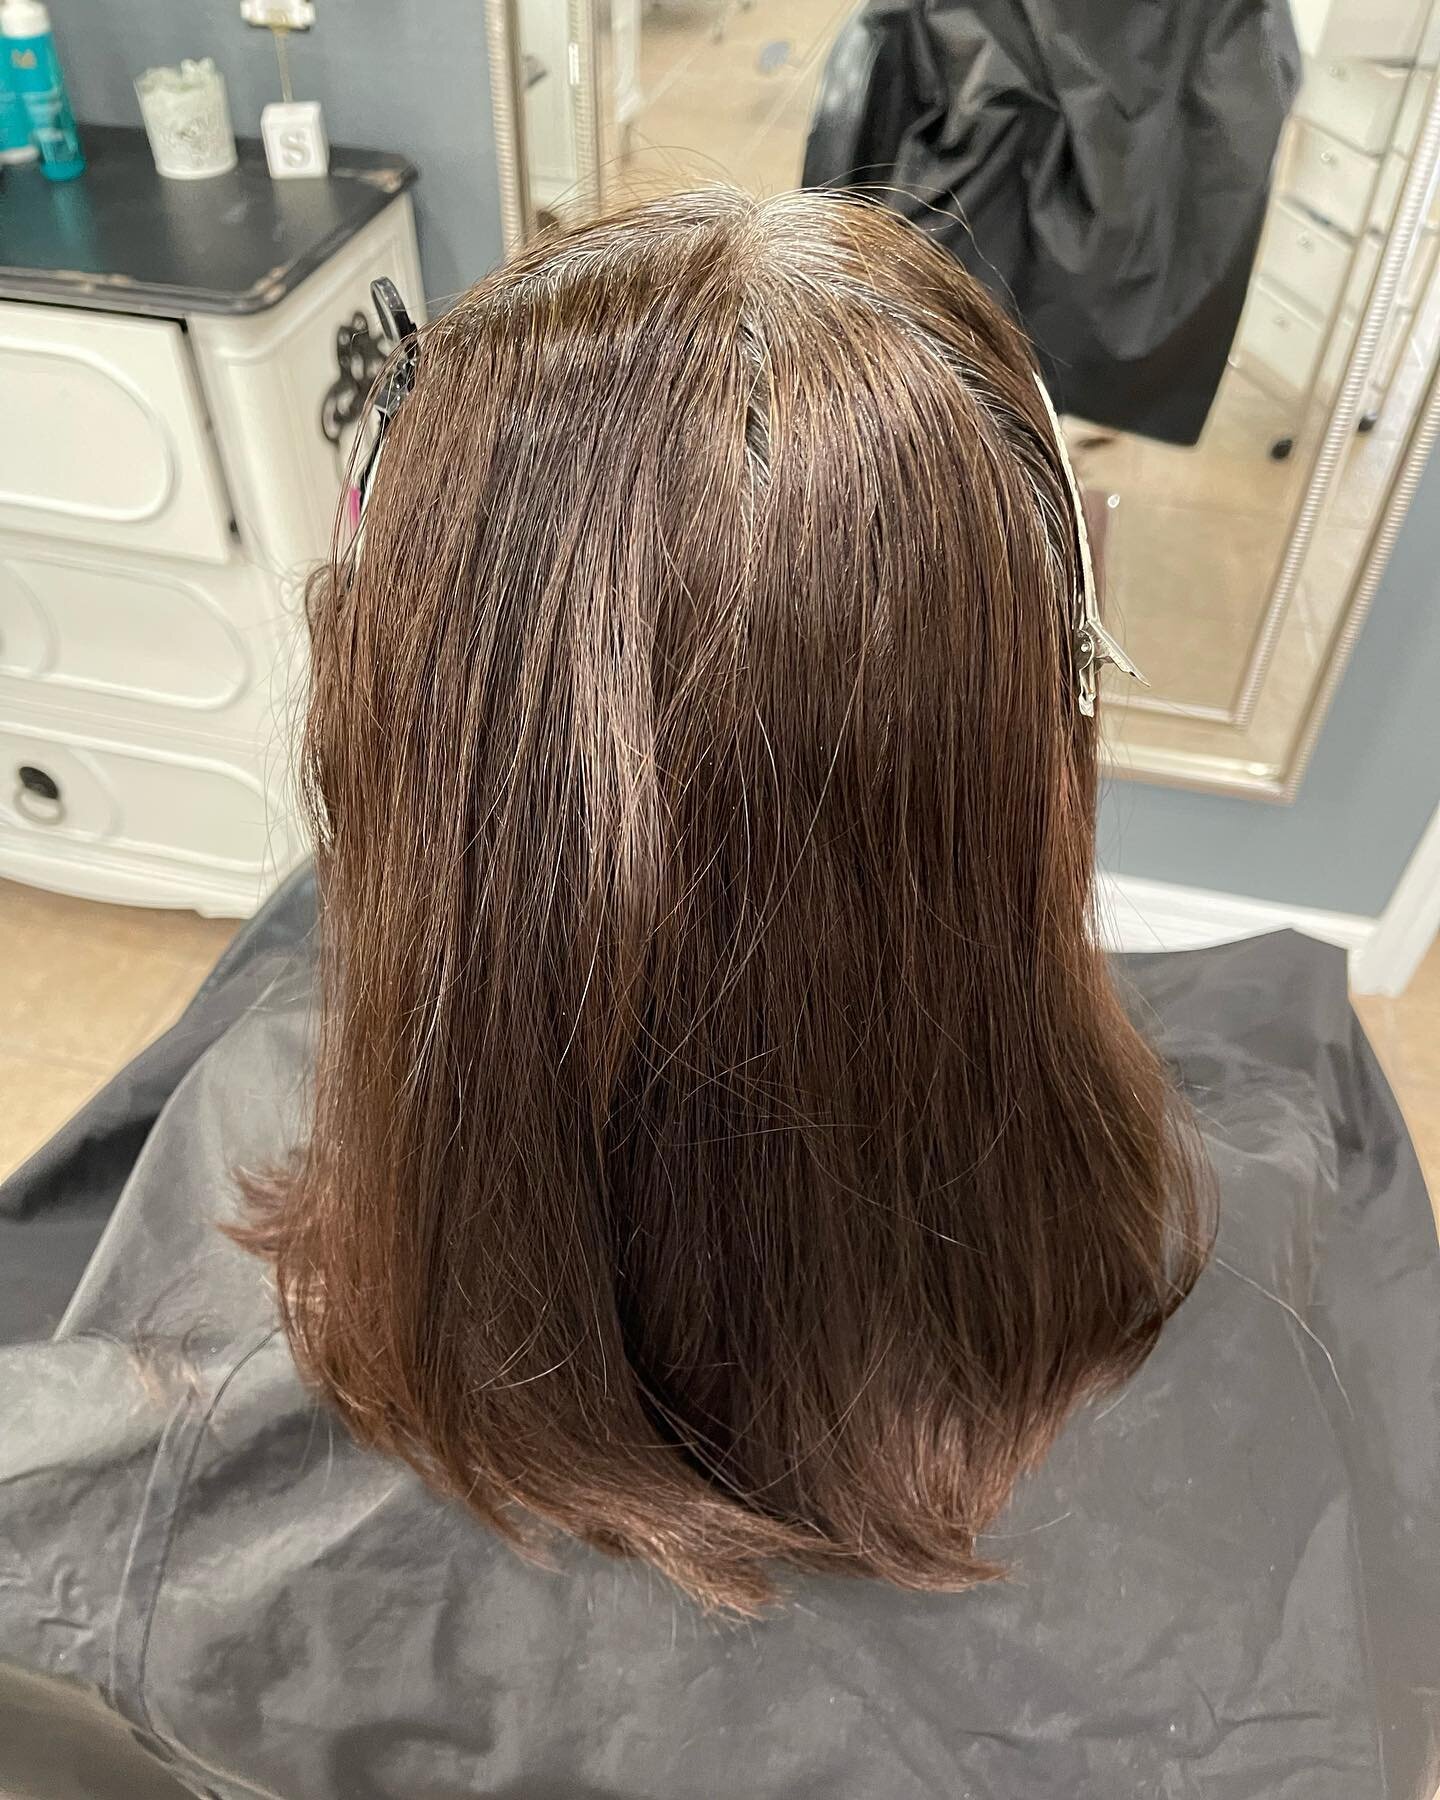 Love love ❤️ This client of mine she want to change cut and color ❤️roundrocktx #roundrock #roundrockhairstylist #hairstylist #colorhairstyle #highlightshair #austinhairstylist #austinhairsalon #pflugervillehairstylist #blondehair #salonsibell #suppo